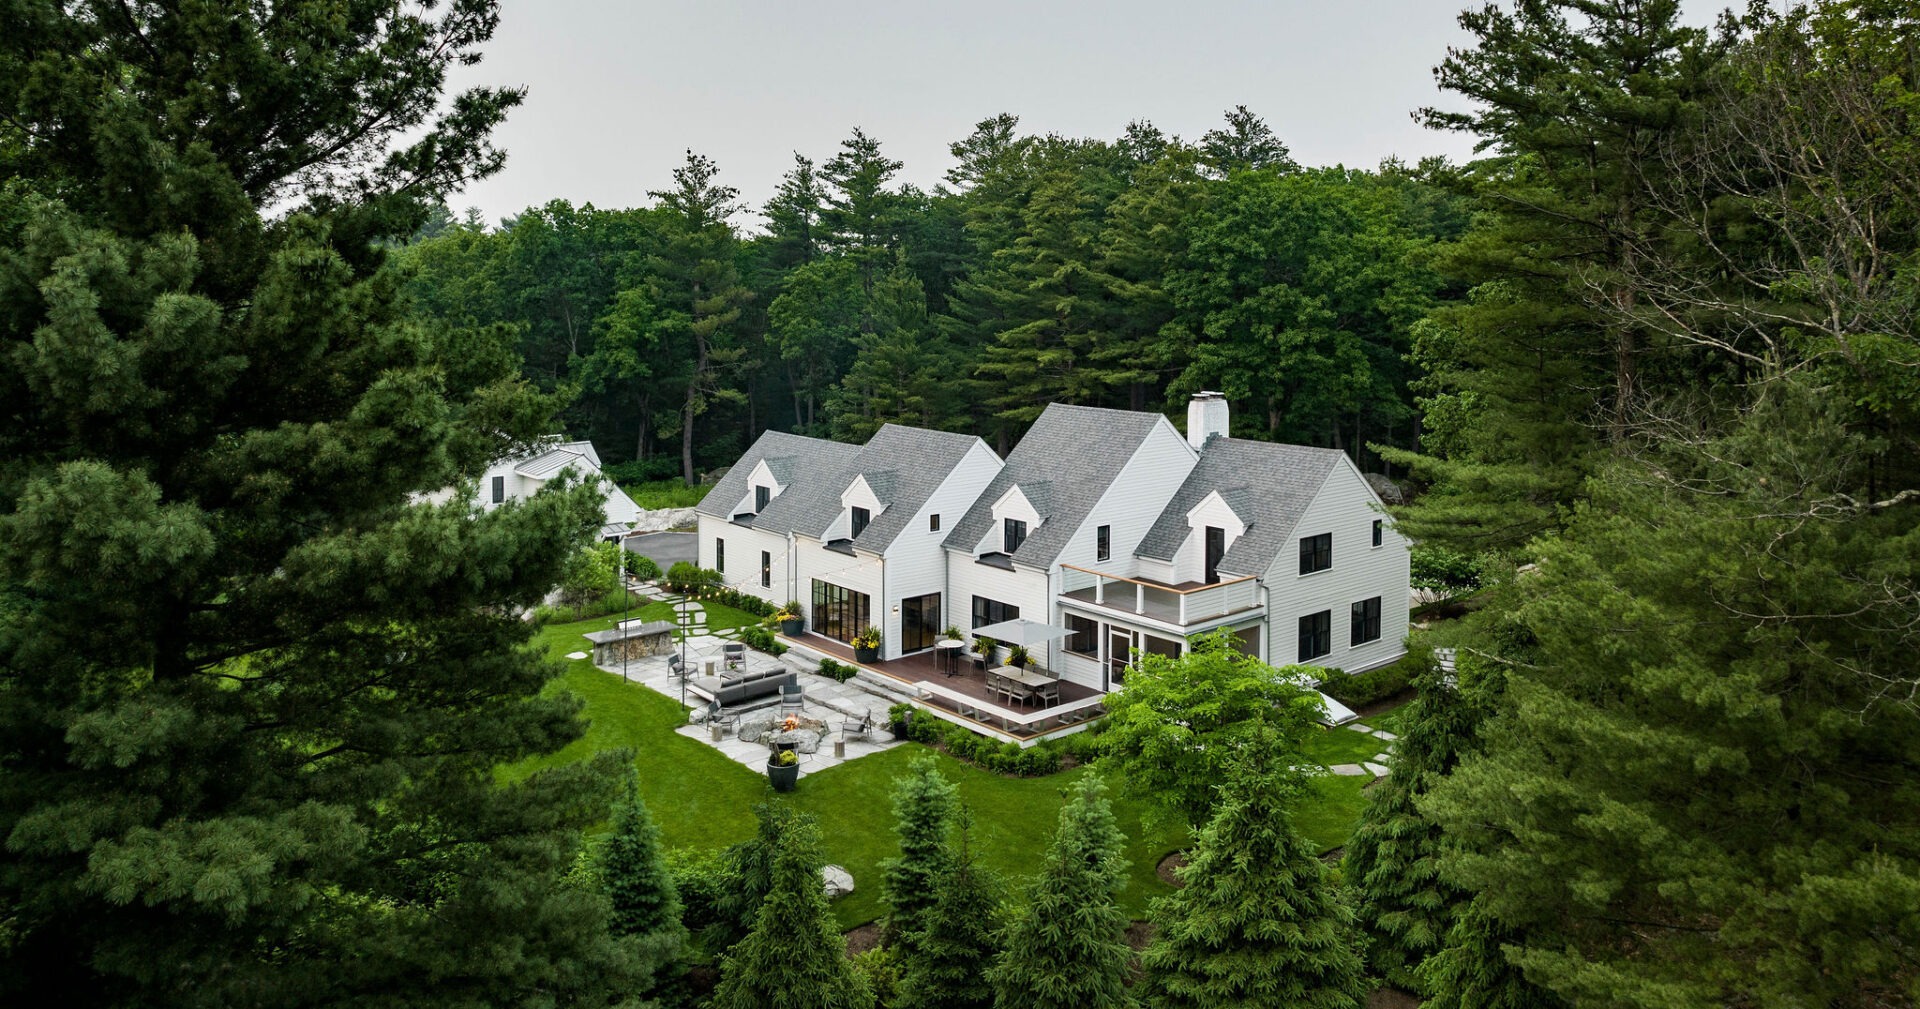 A large, luxurious white house with grey roofs, nestled among lush green trees, boasts landscaped gardens and a spacious outdoor entertaining area.